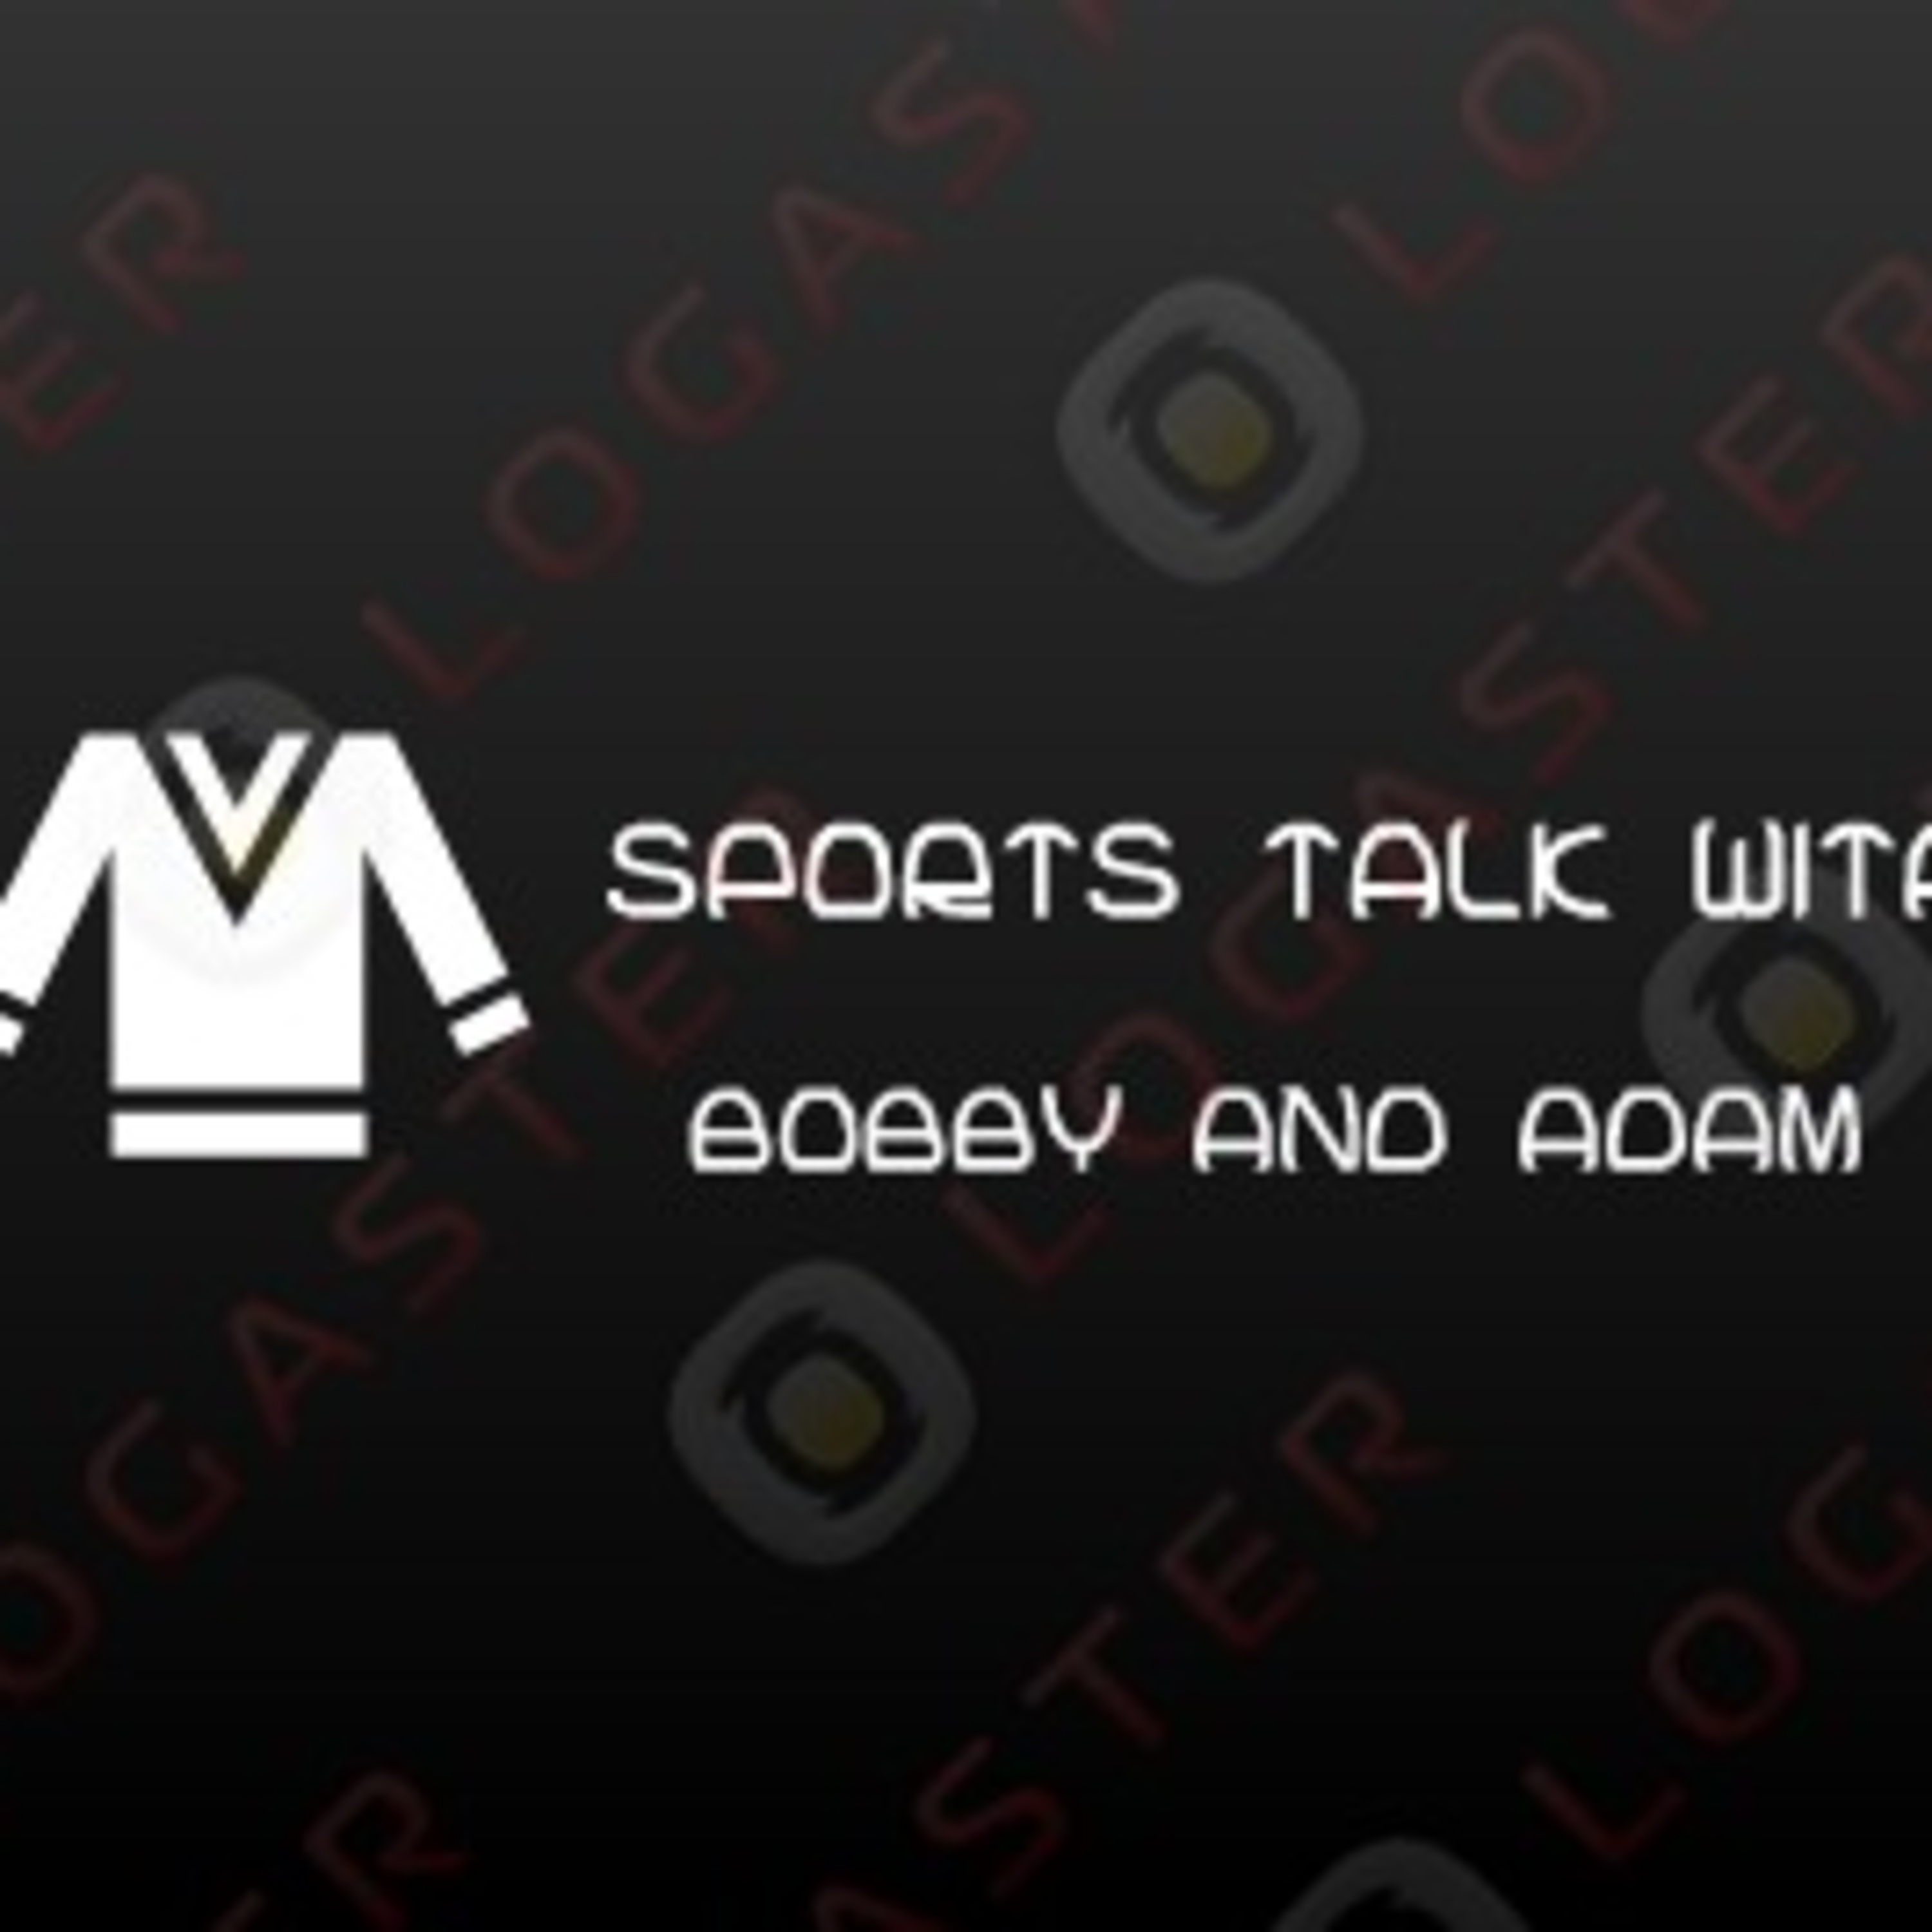 SPORTS TALK with Bobby and Adam